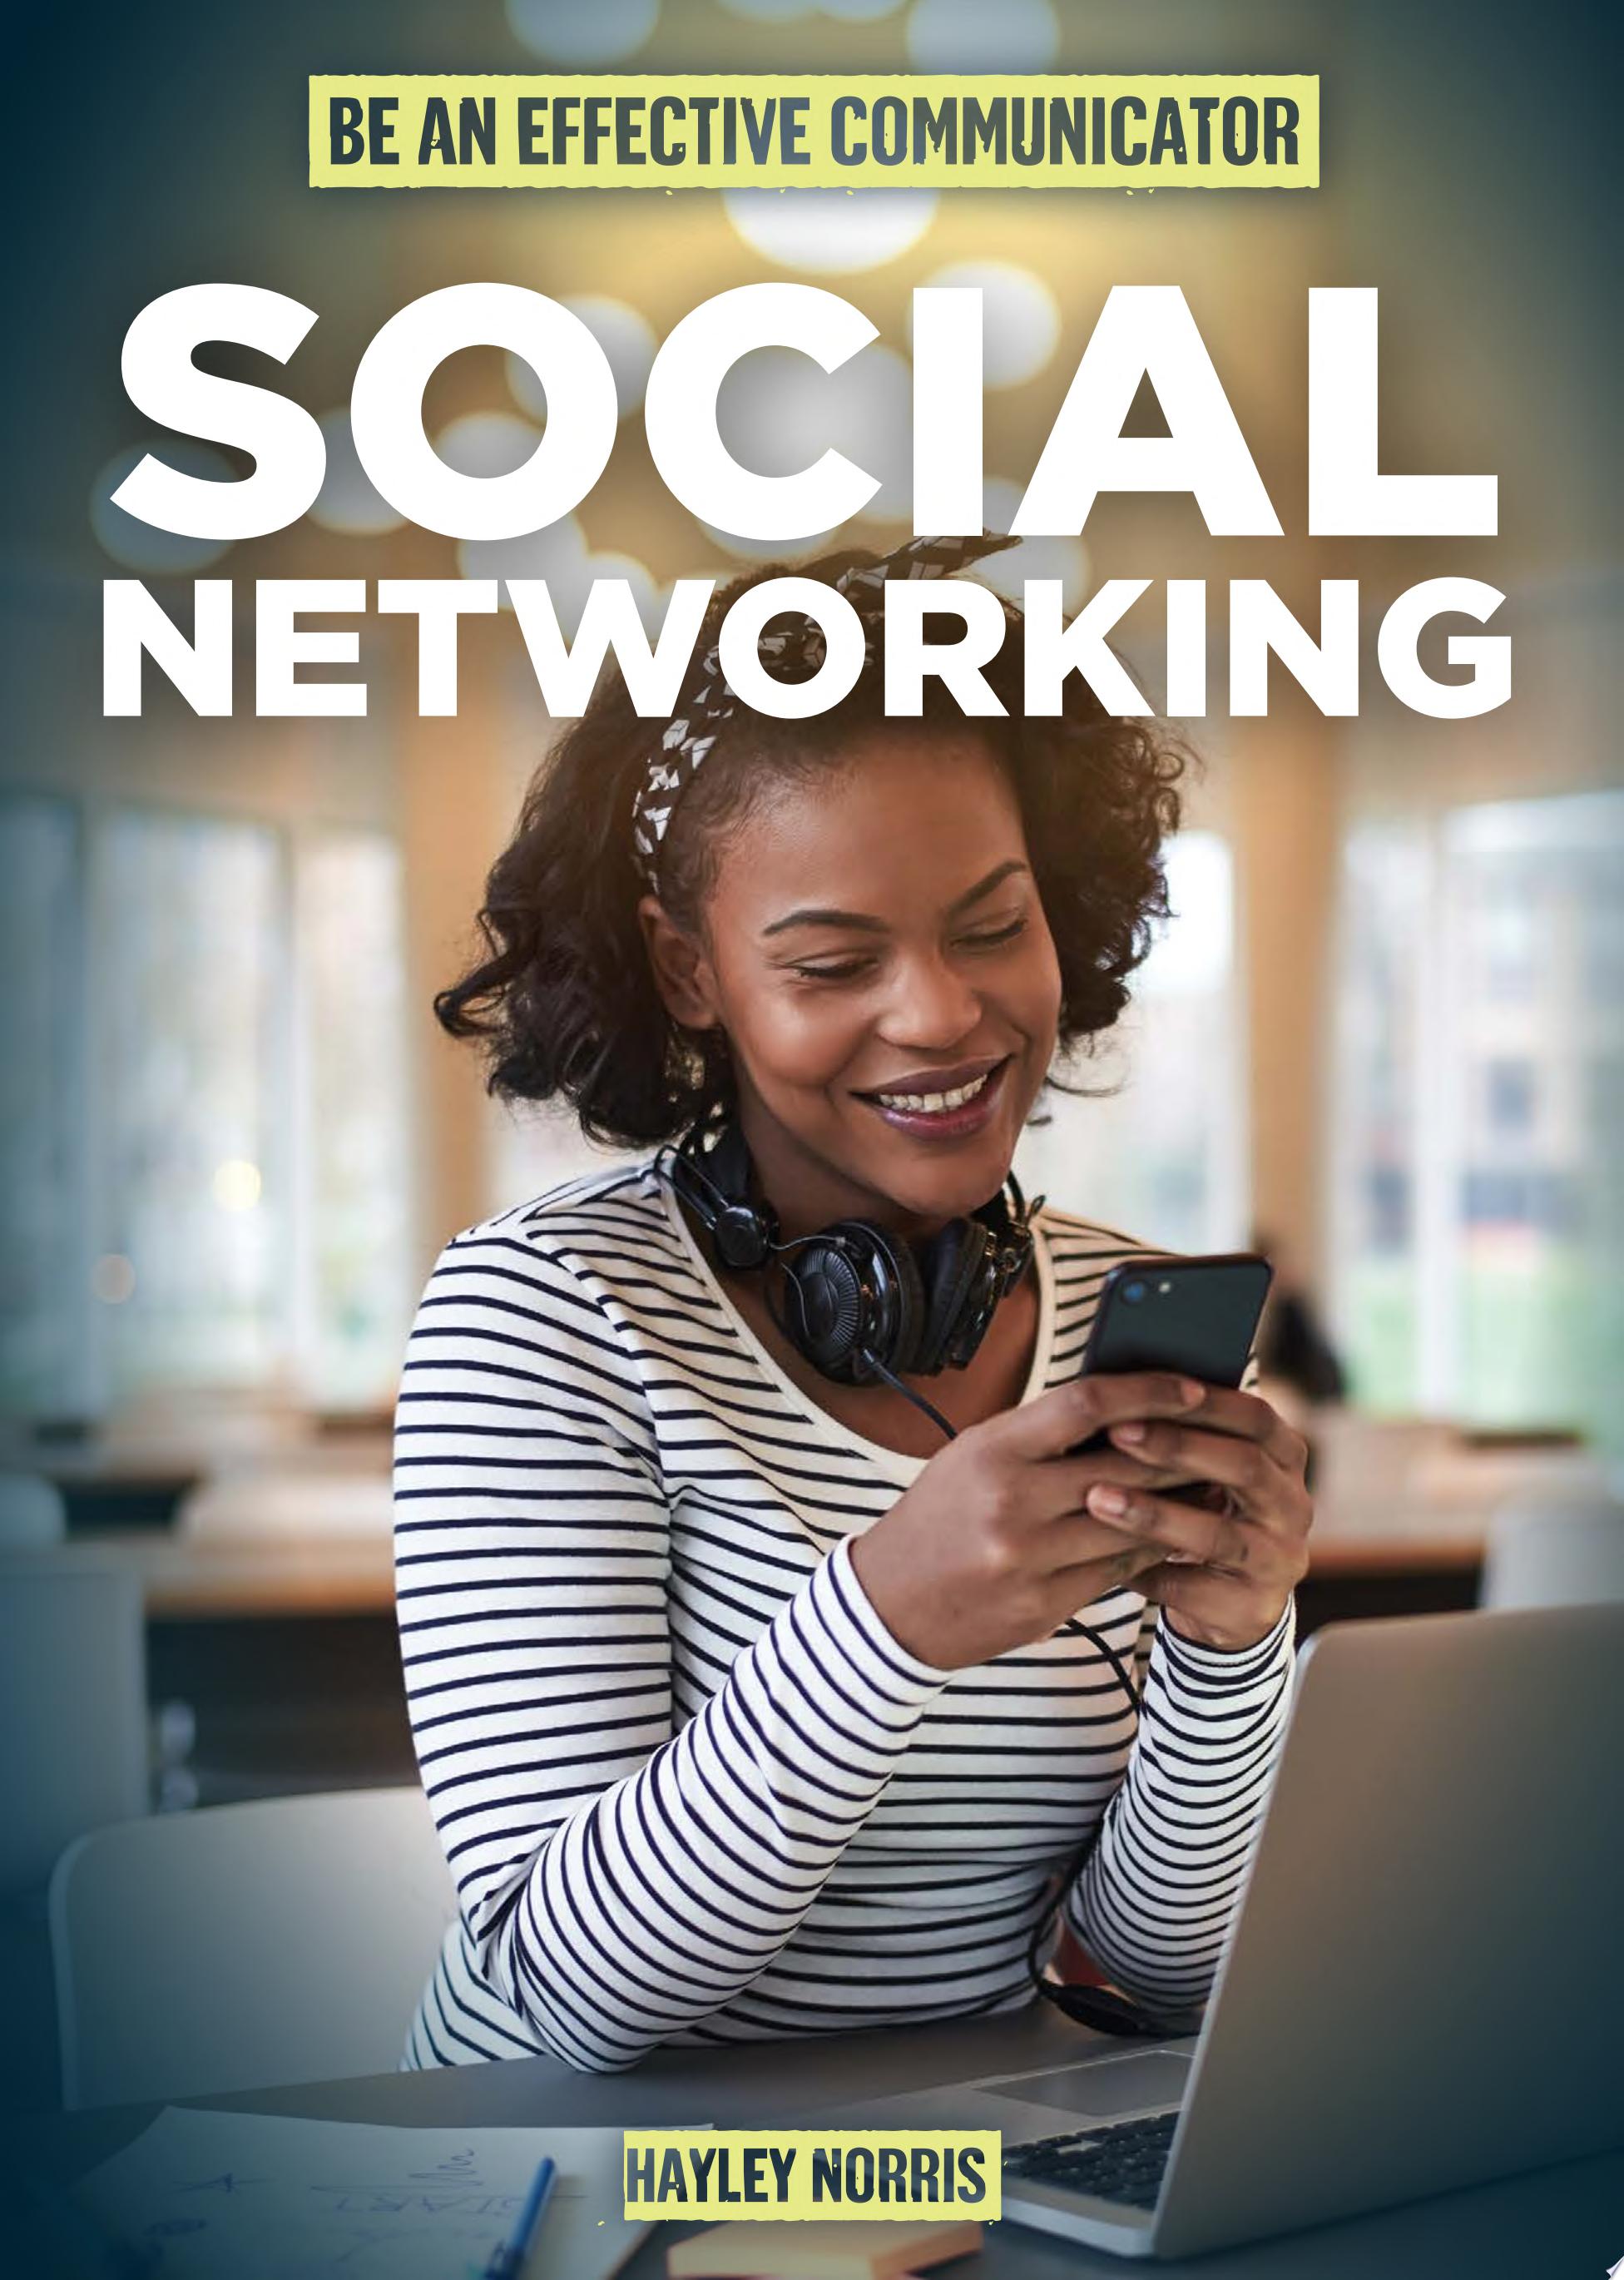 Image for "Social Networking"